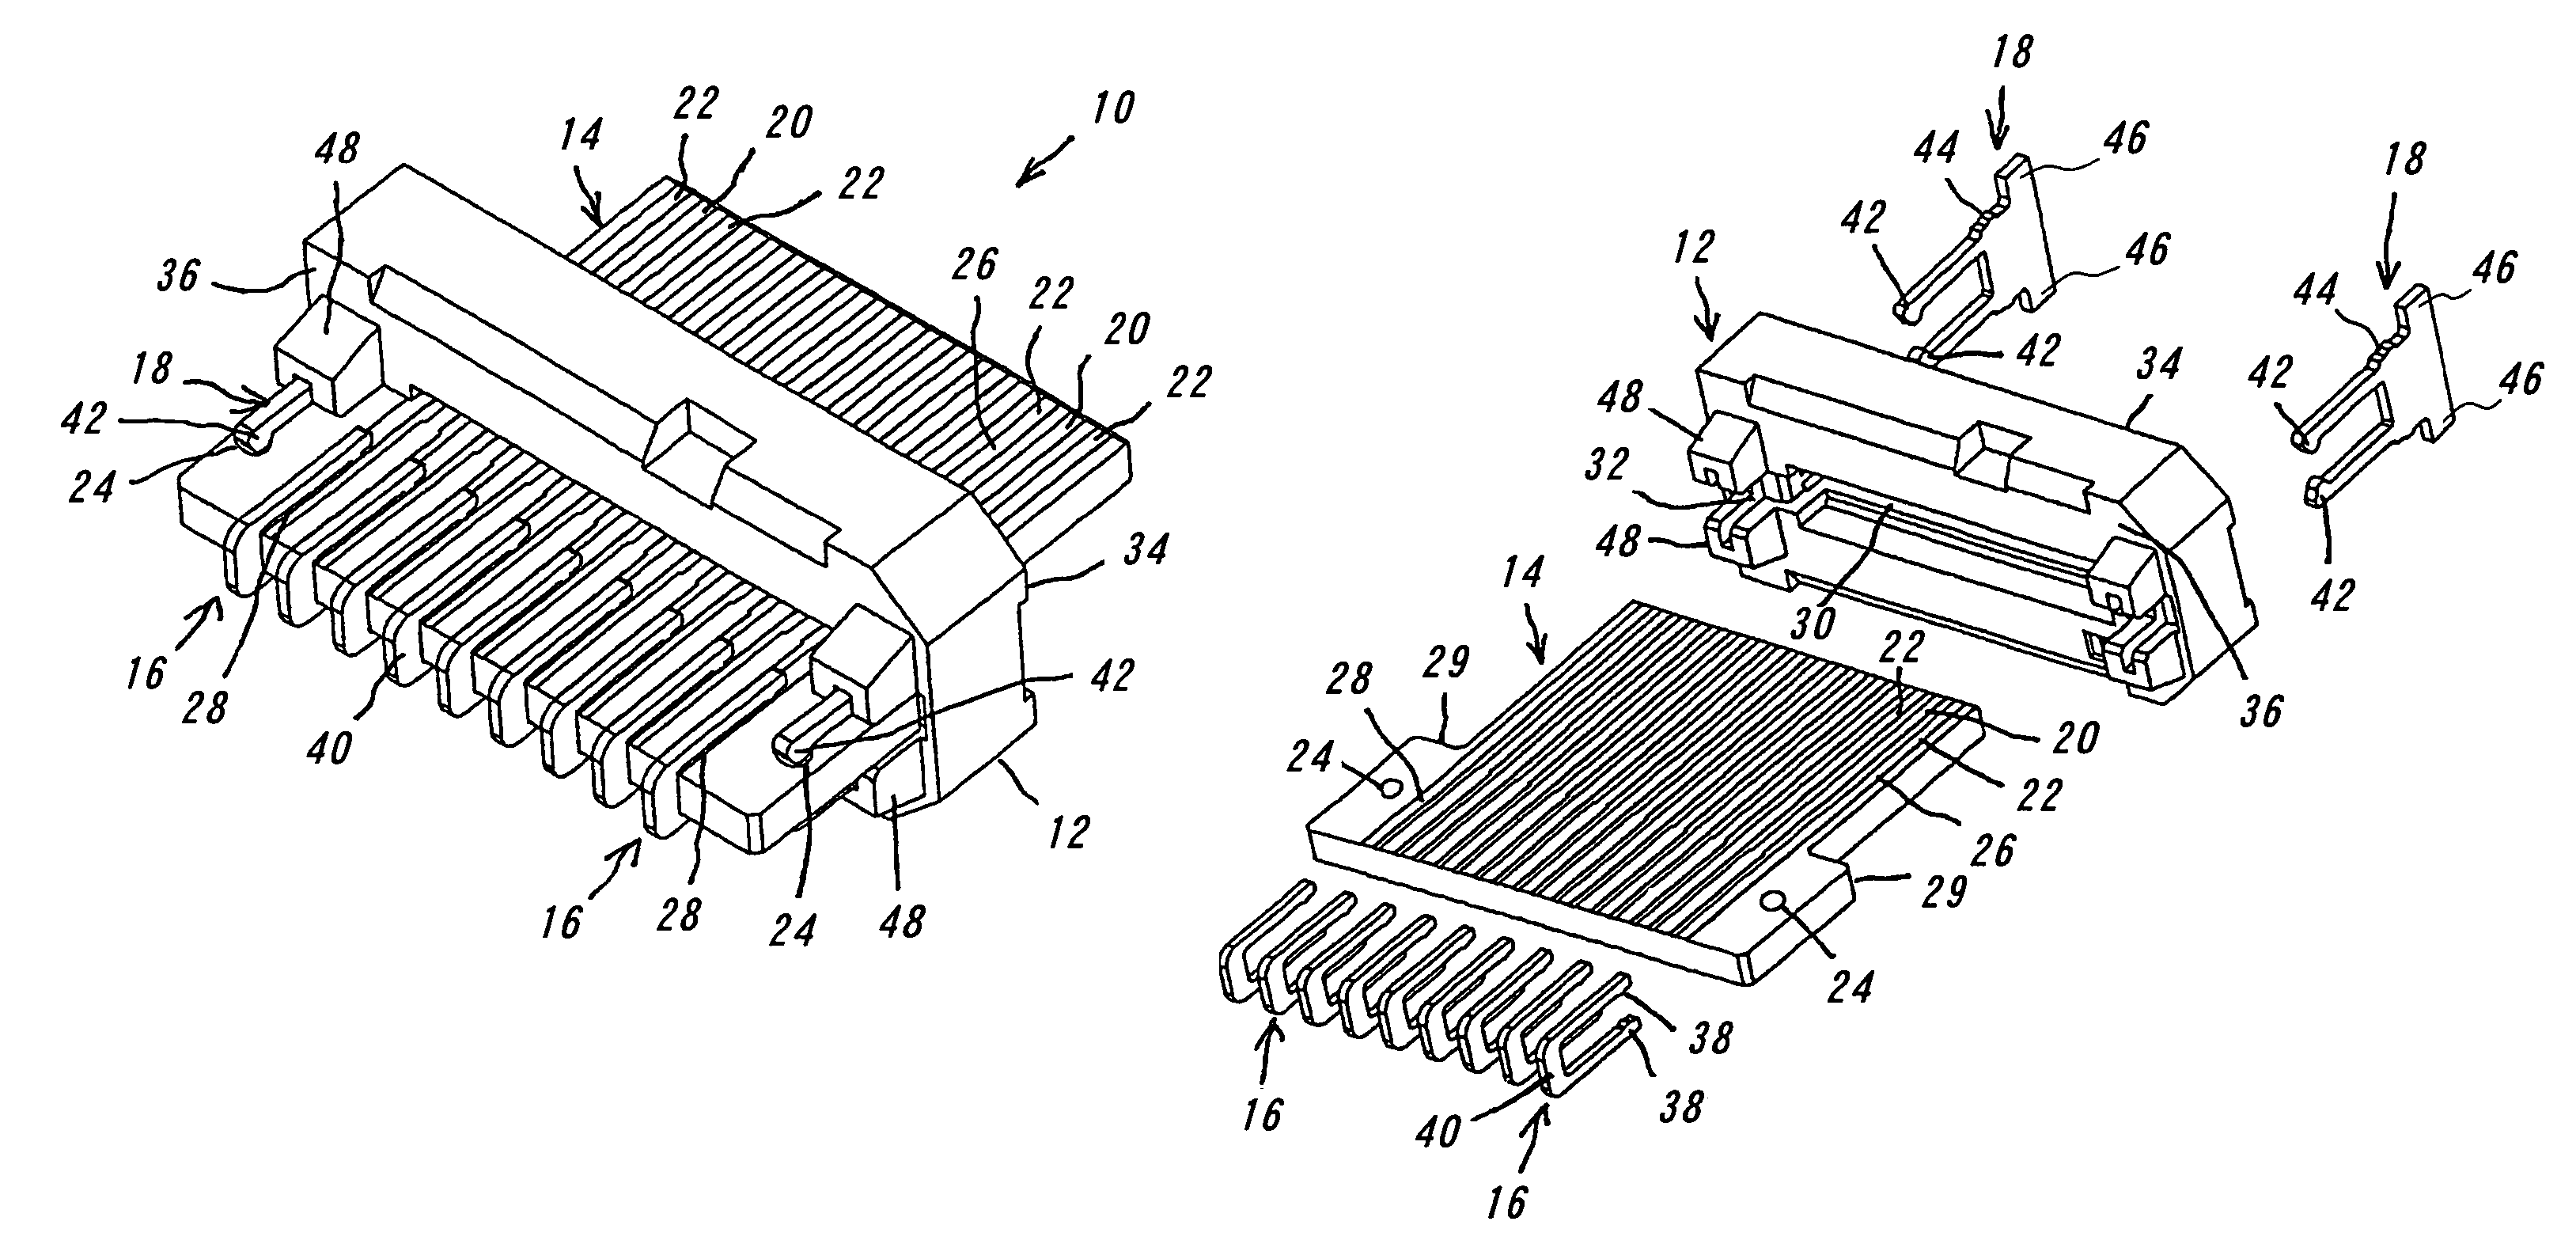 Electrical connector using a substrate as a contacting member